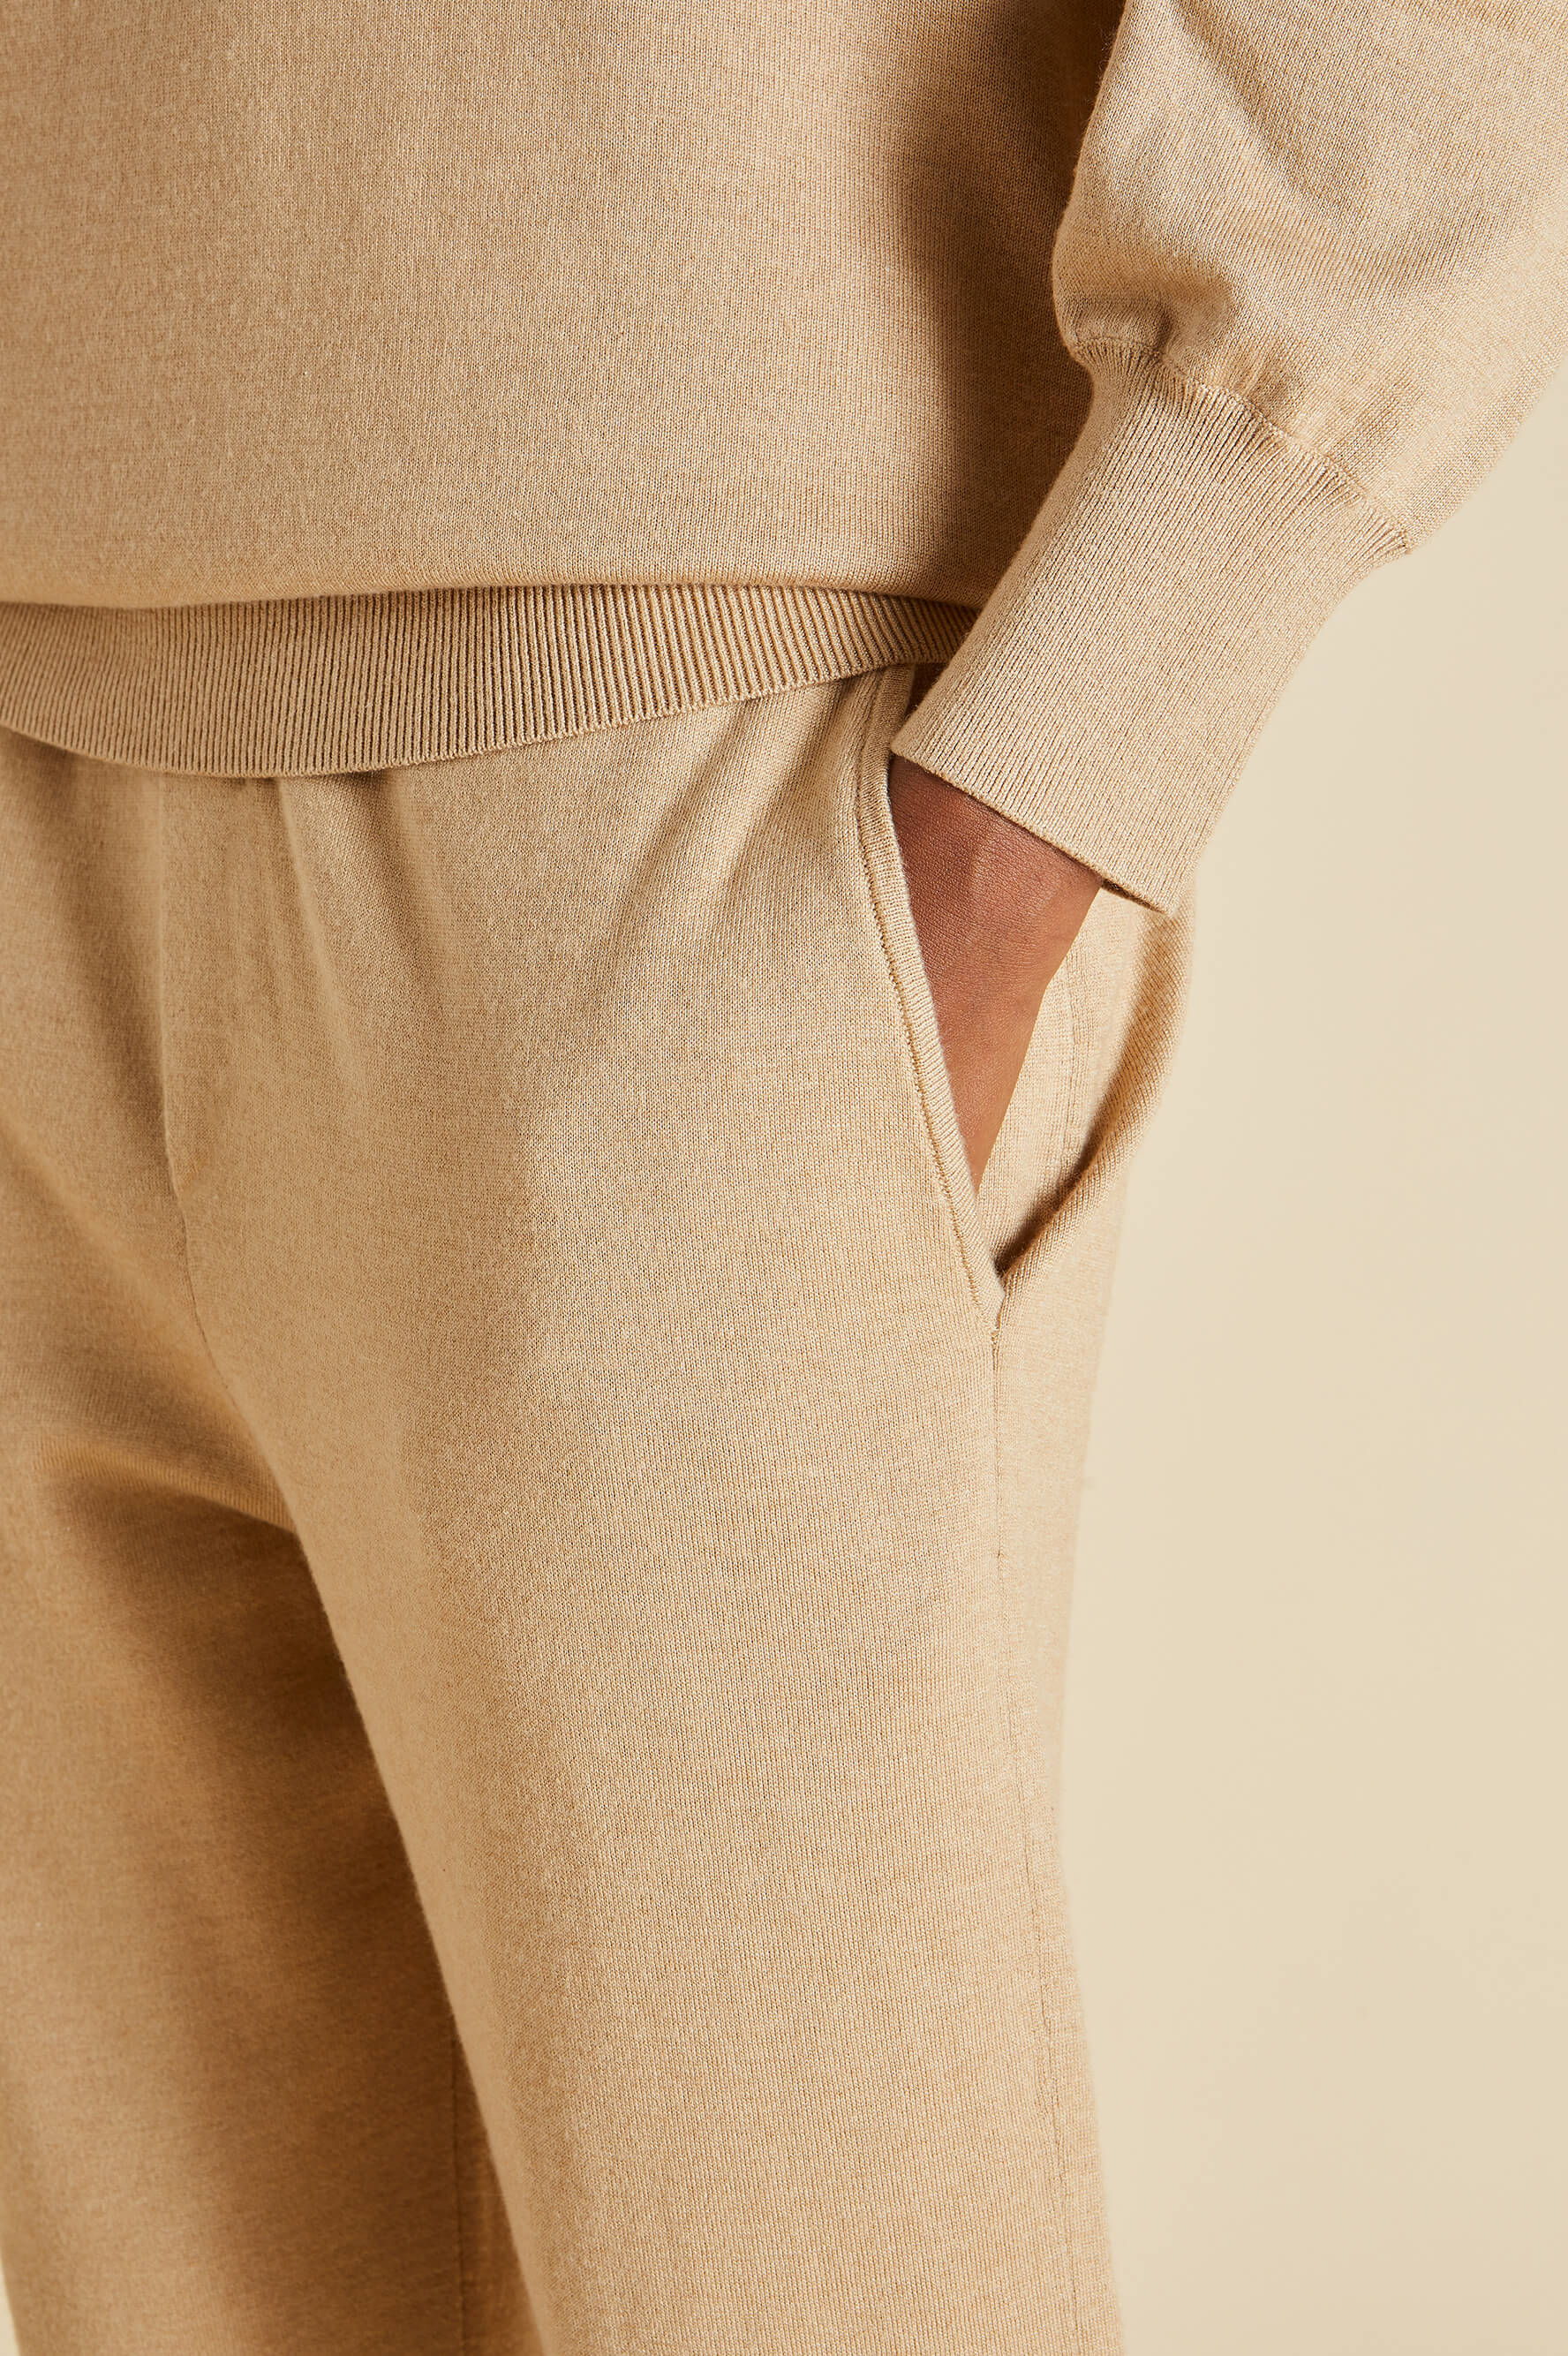 Gia Shanghai Beige Tracksuit in Silk-Cashmere